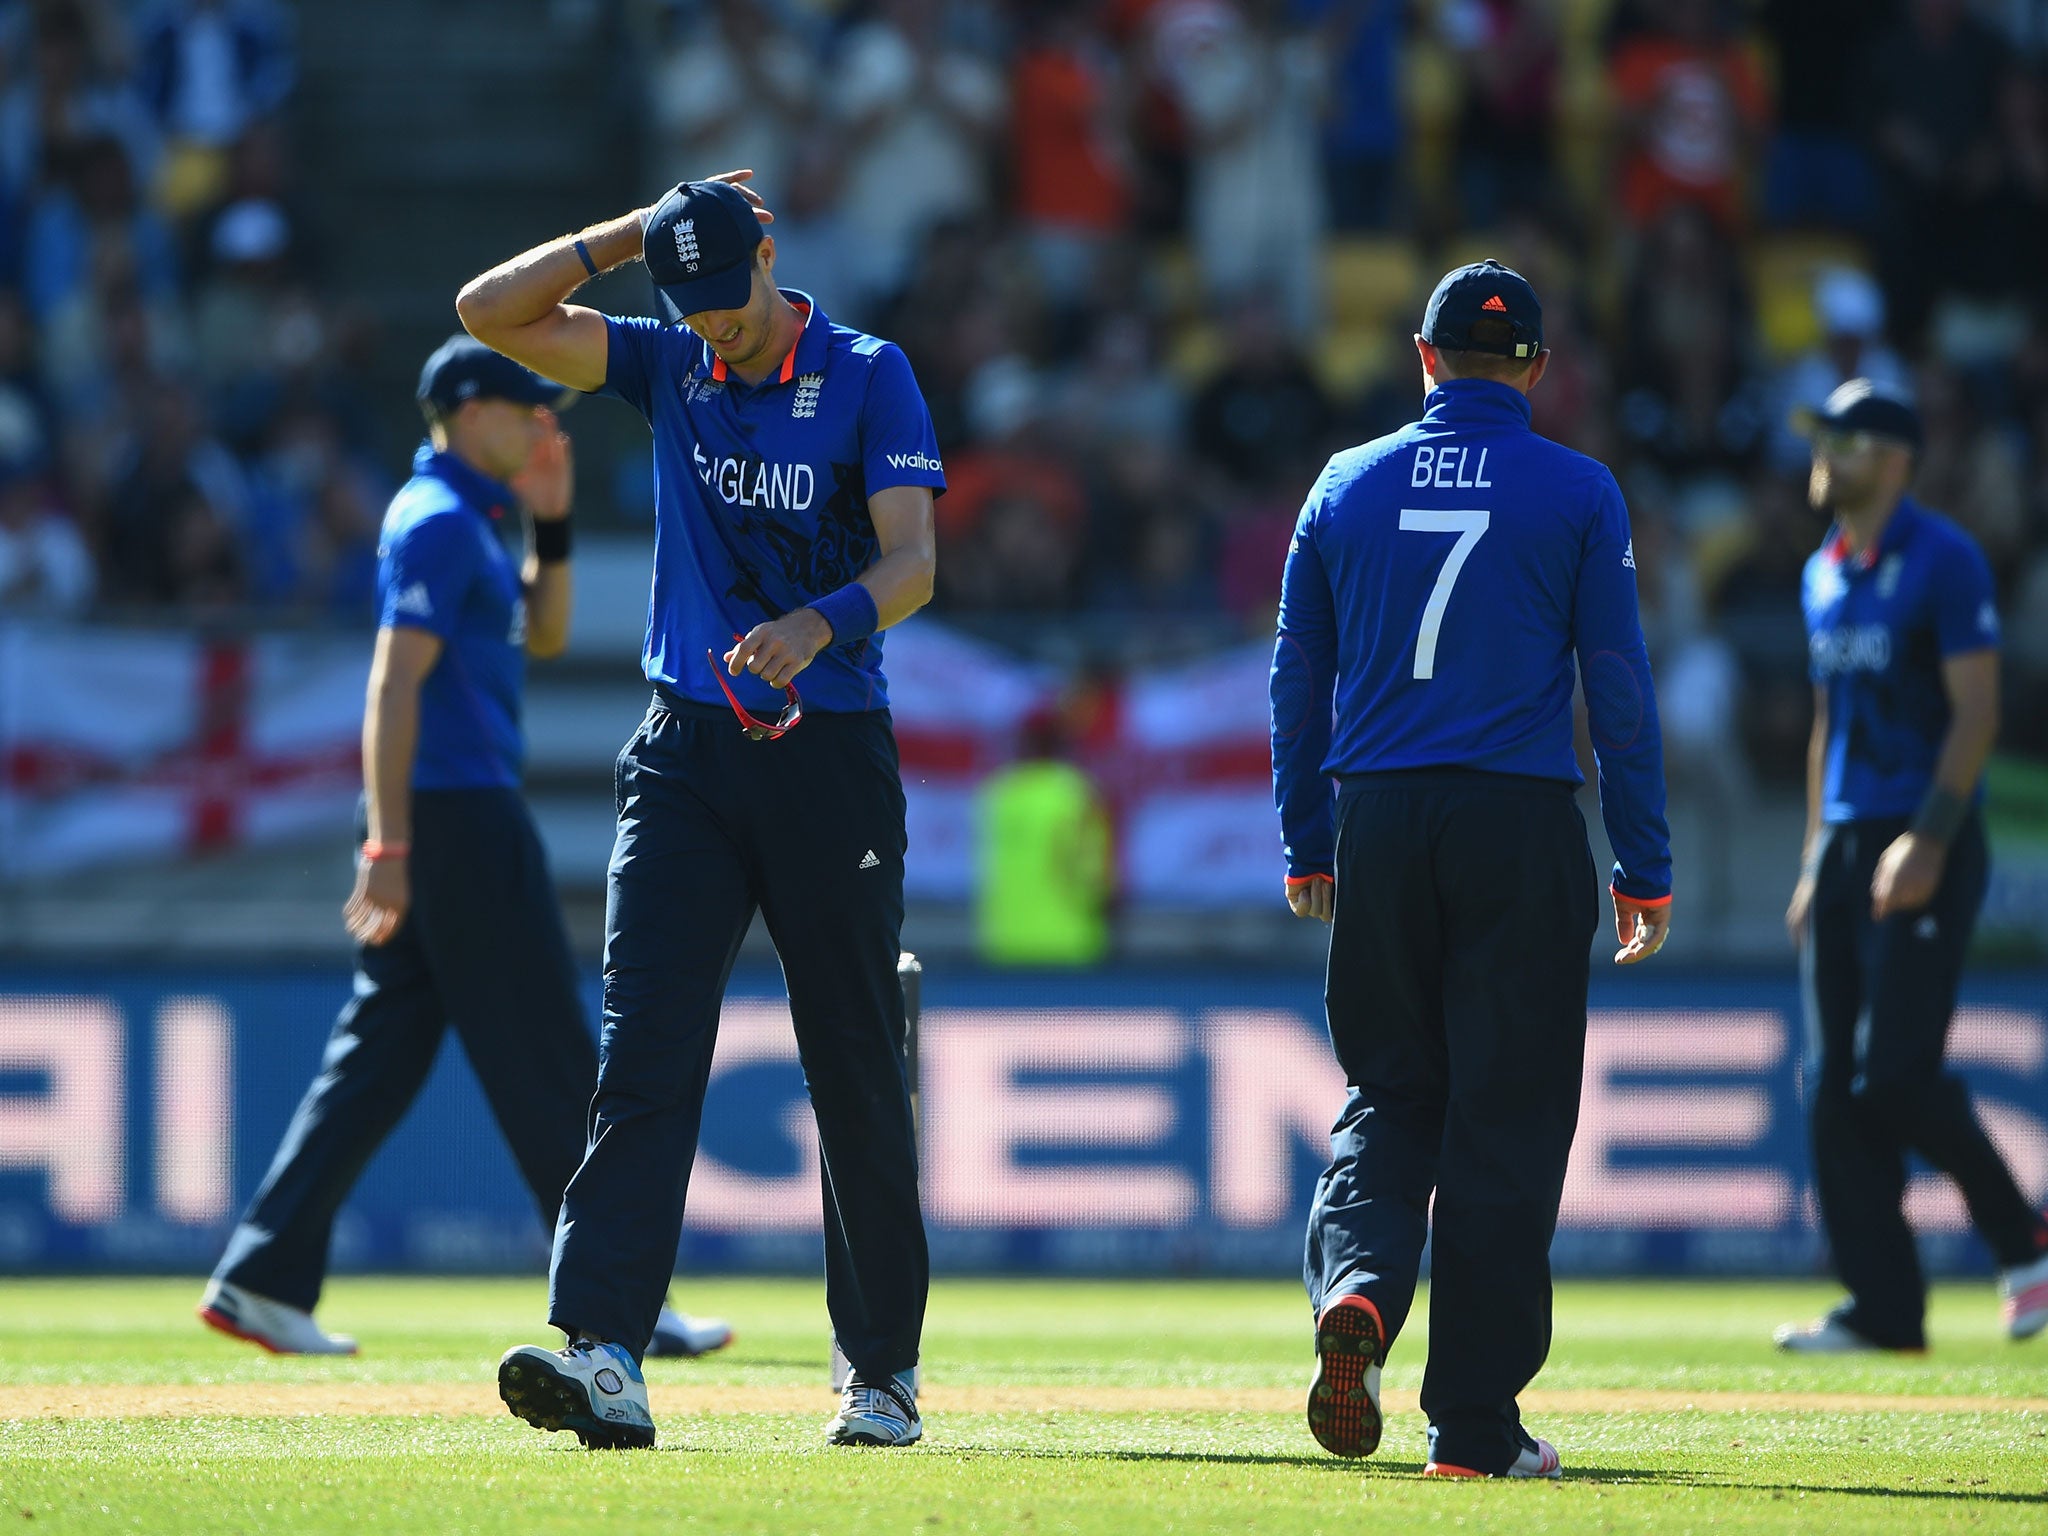 Steven Finn appears dejected after his two overs were smashed for 49 runs